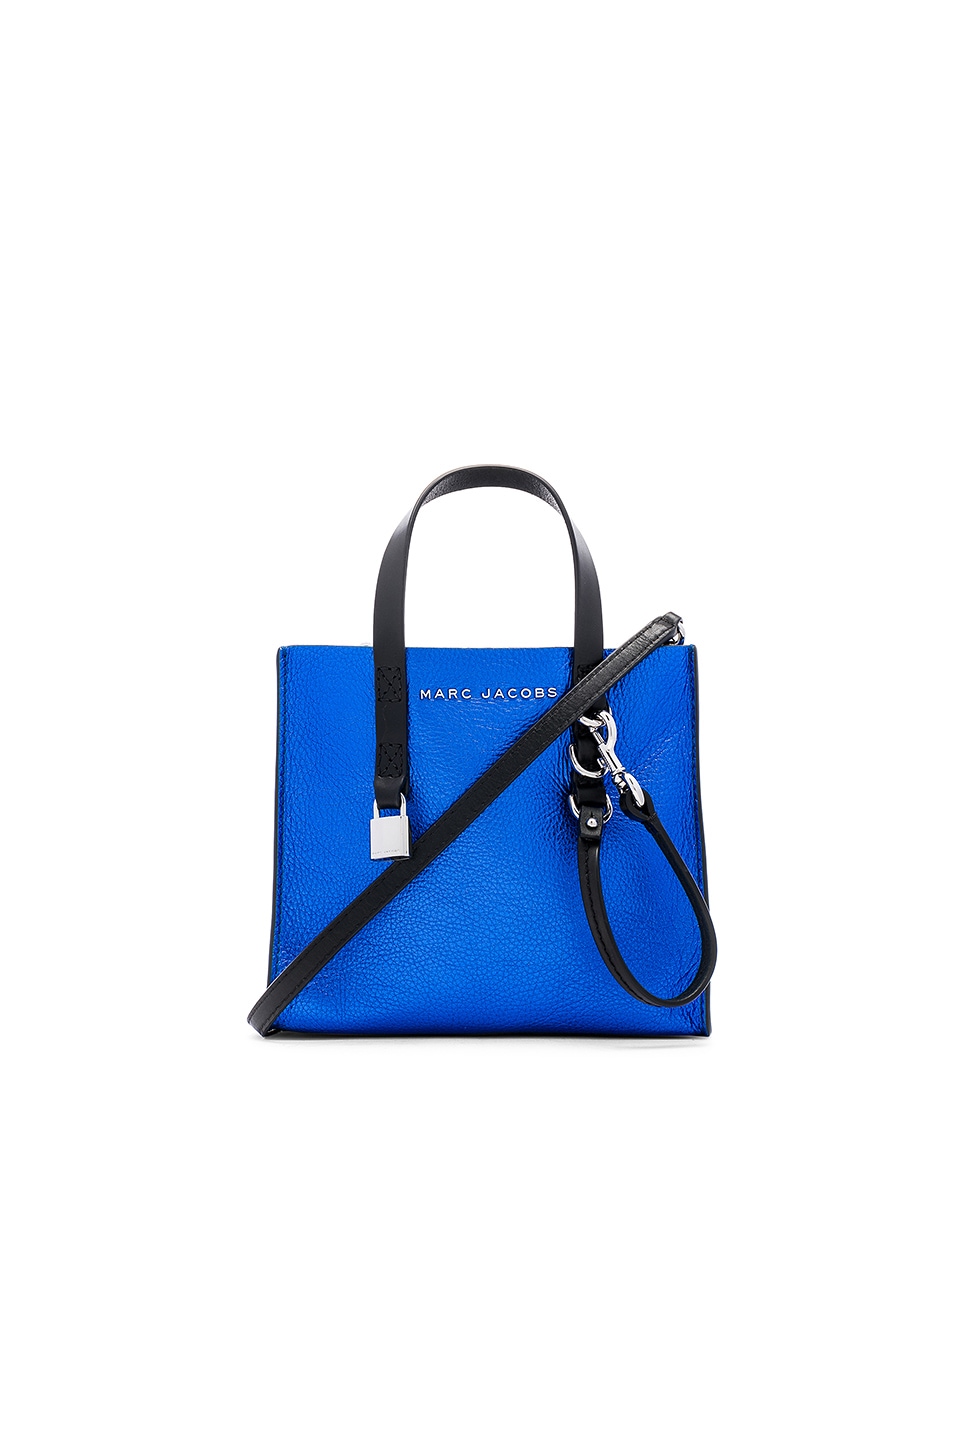 MARC JACOBS MARC JACOBS MINI GRIND BAG IN BLUE.,MARJ-WY386